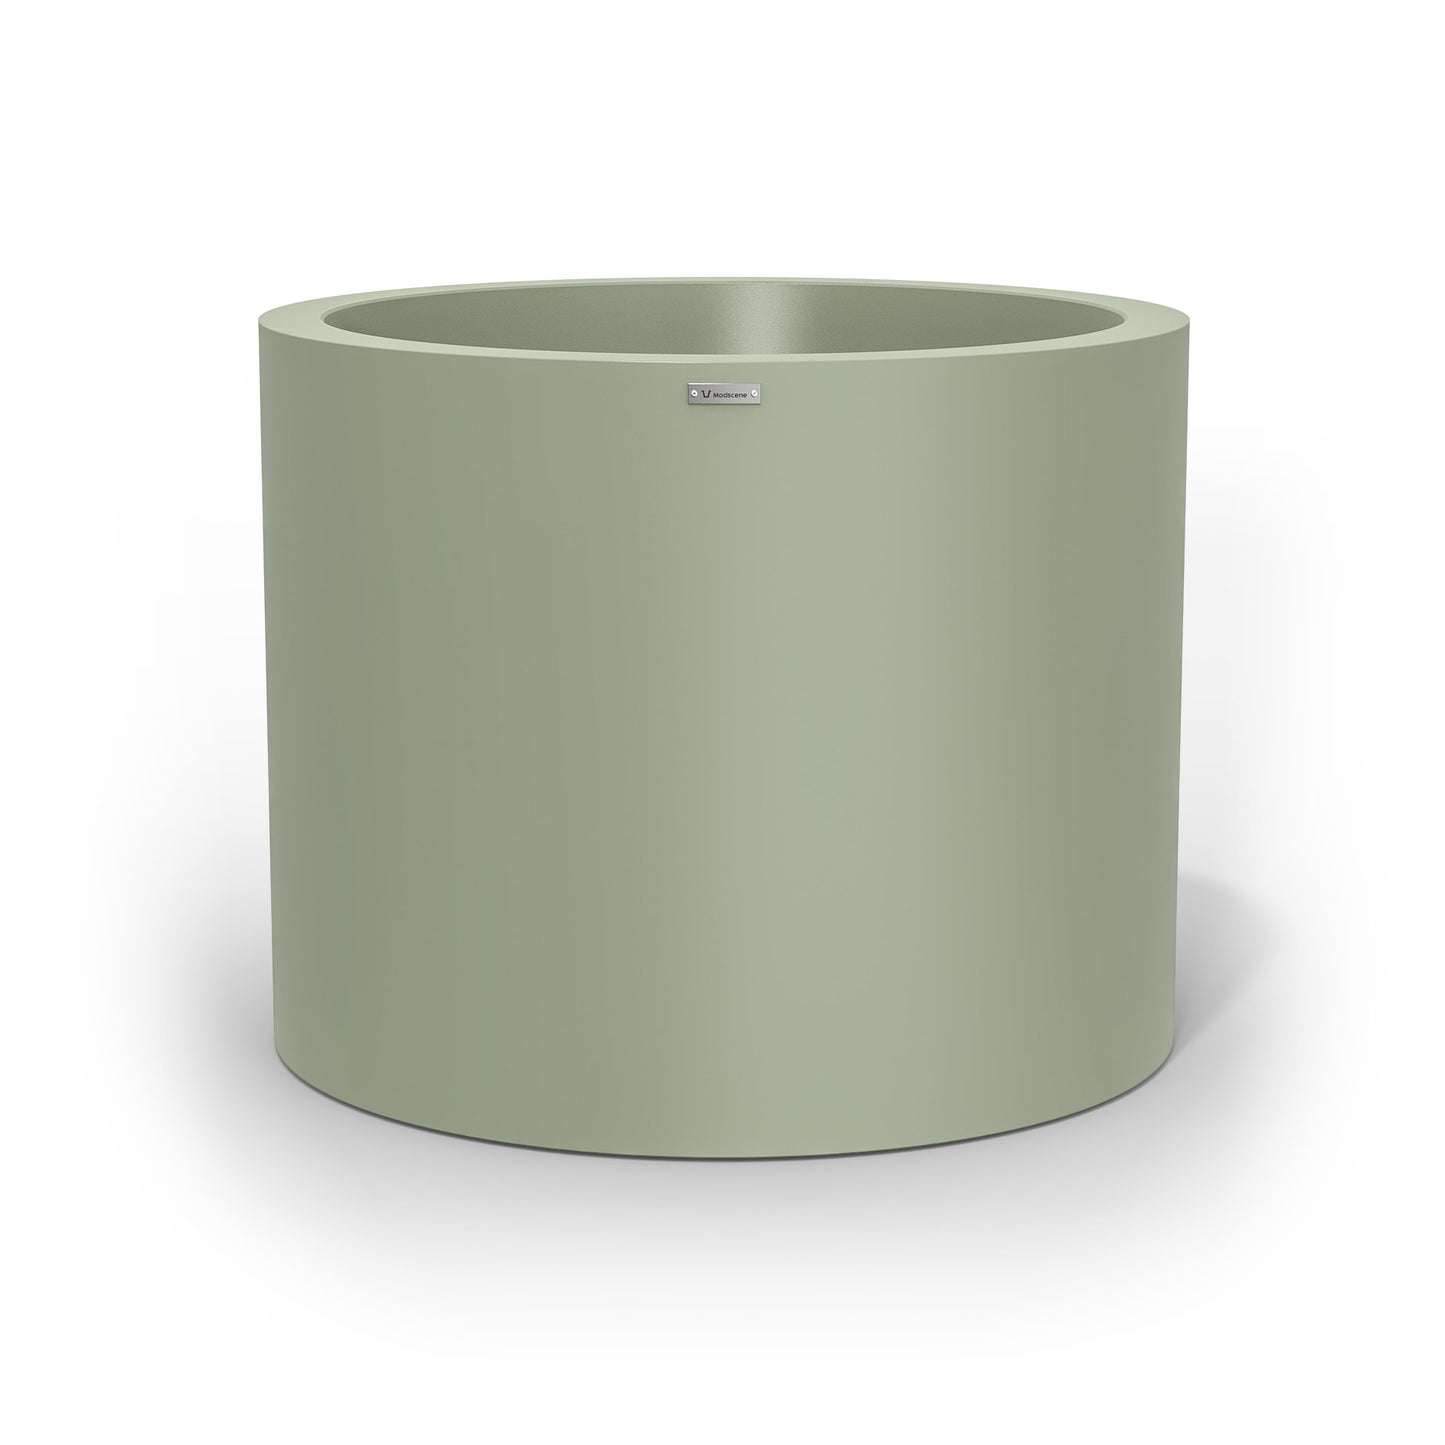 An extra large cylinder pot planter in a moss green colour. Made by Modscene NZ.